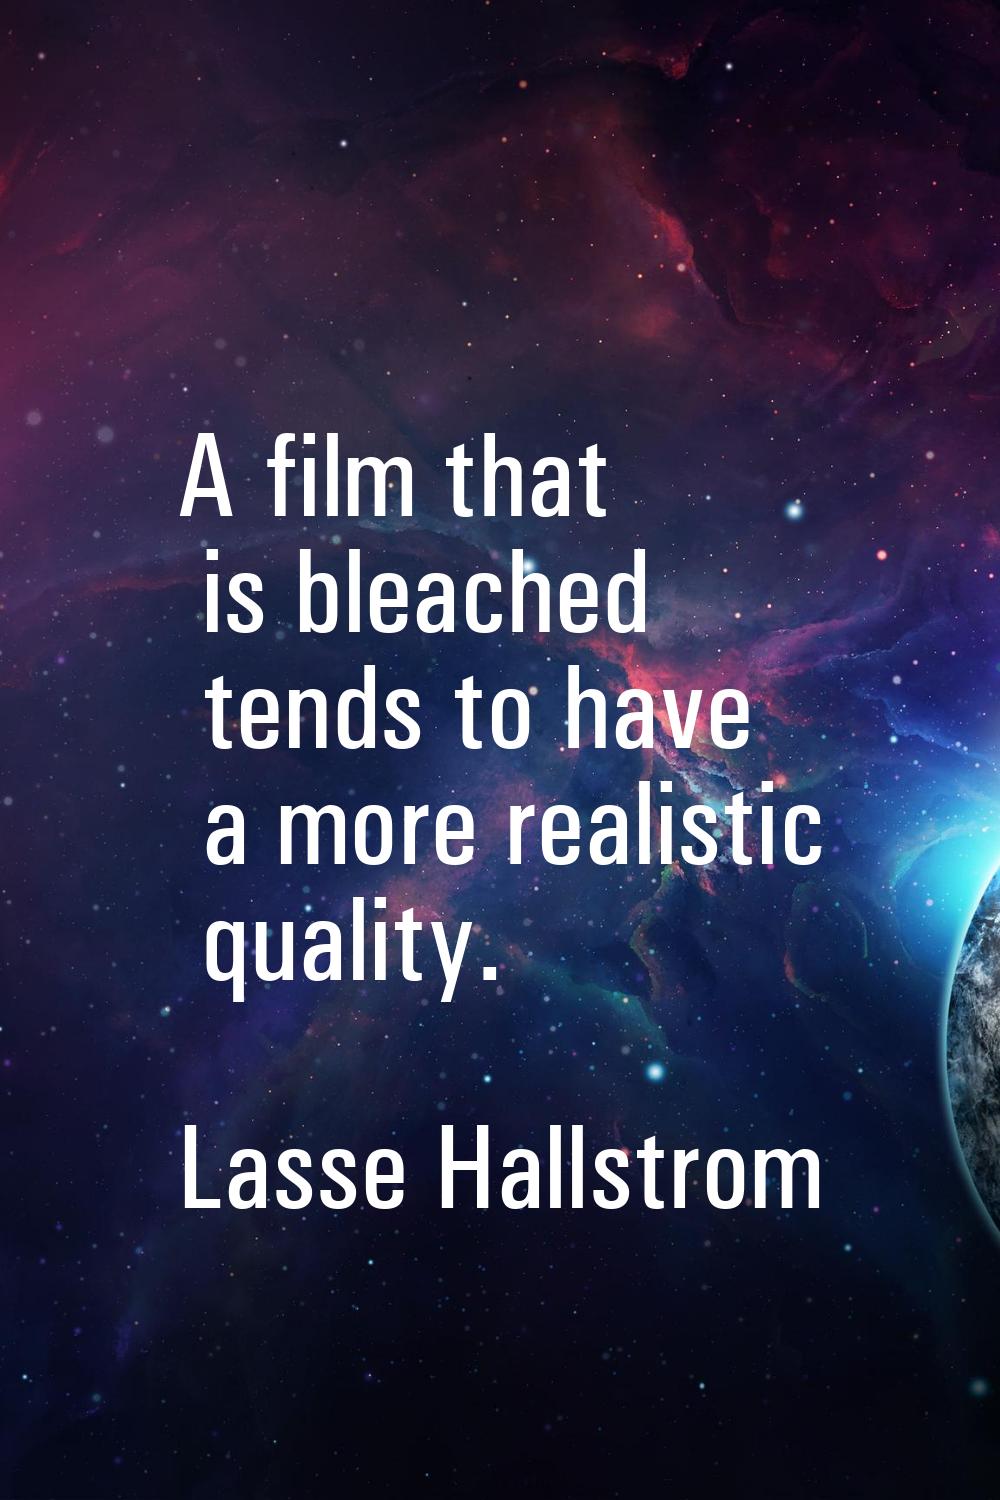 A film that is bleached tends to have a more realistic quality.